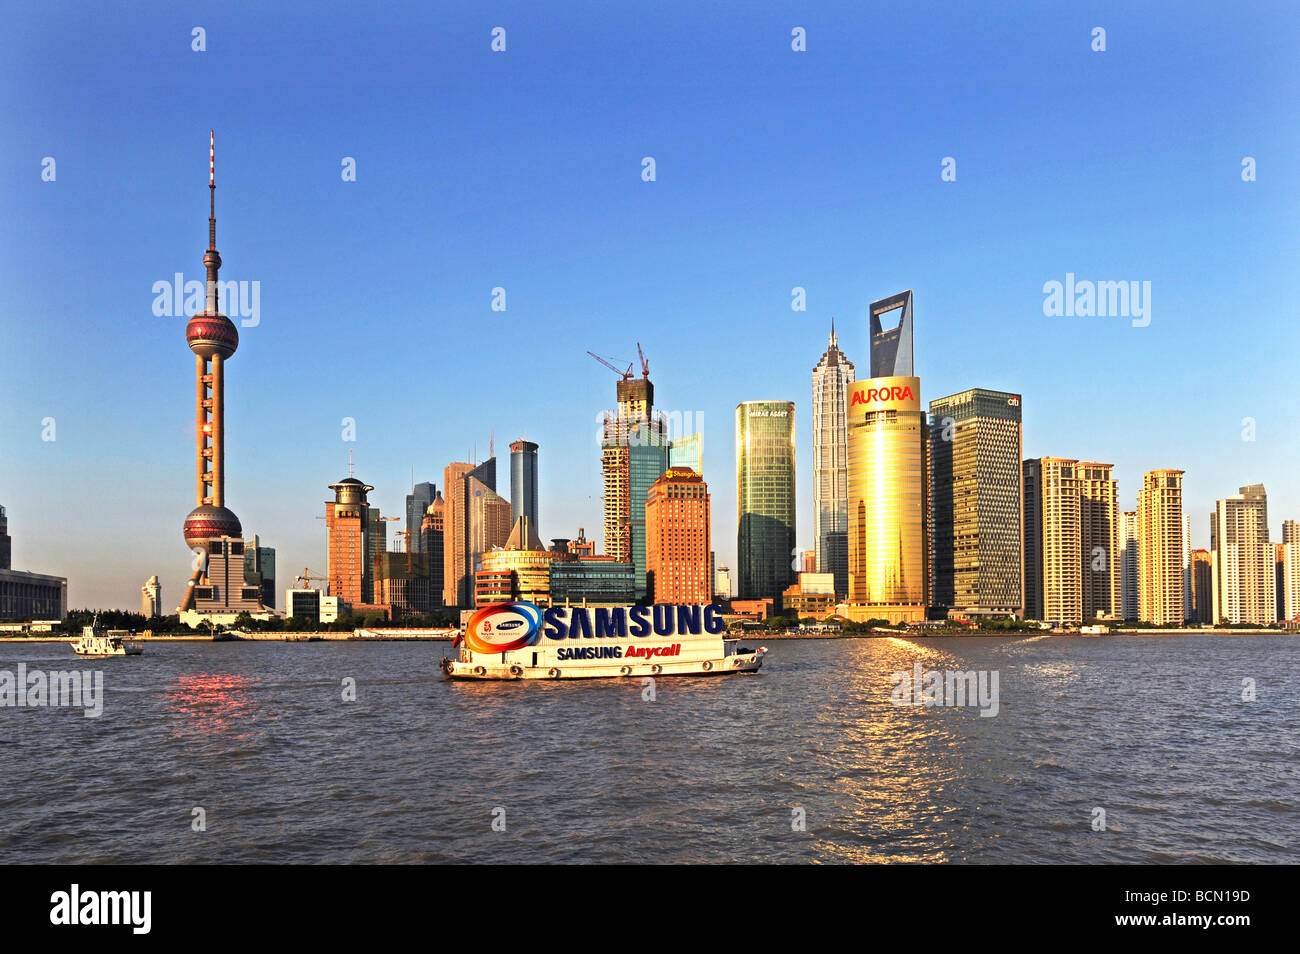 NEW POSTER Shanghai Pudong Skyline China Foreign City View 